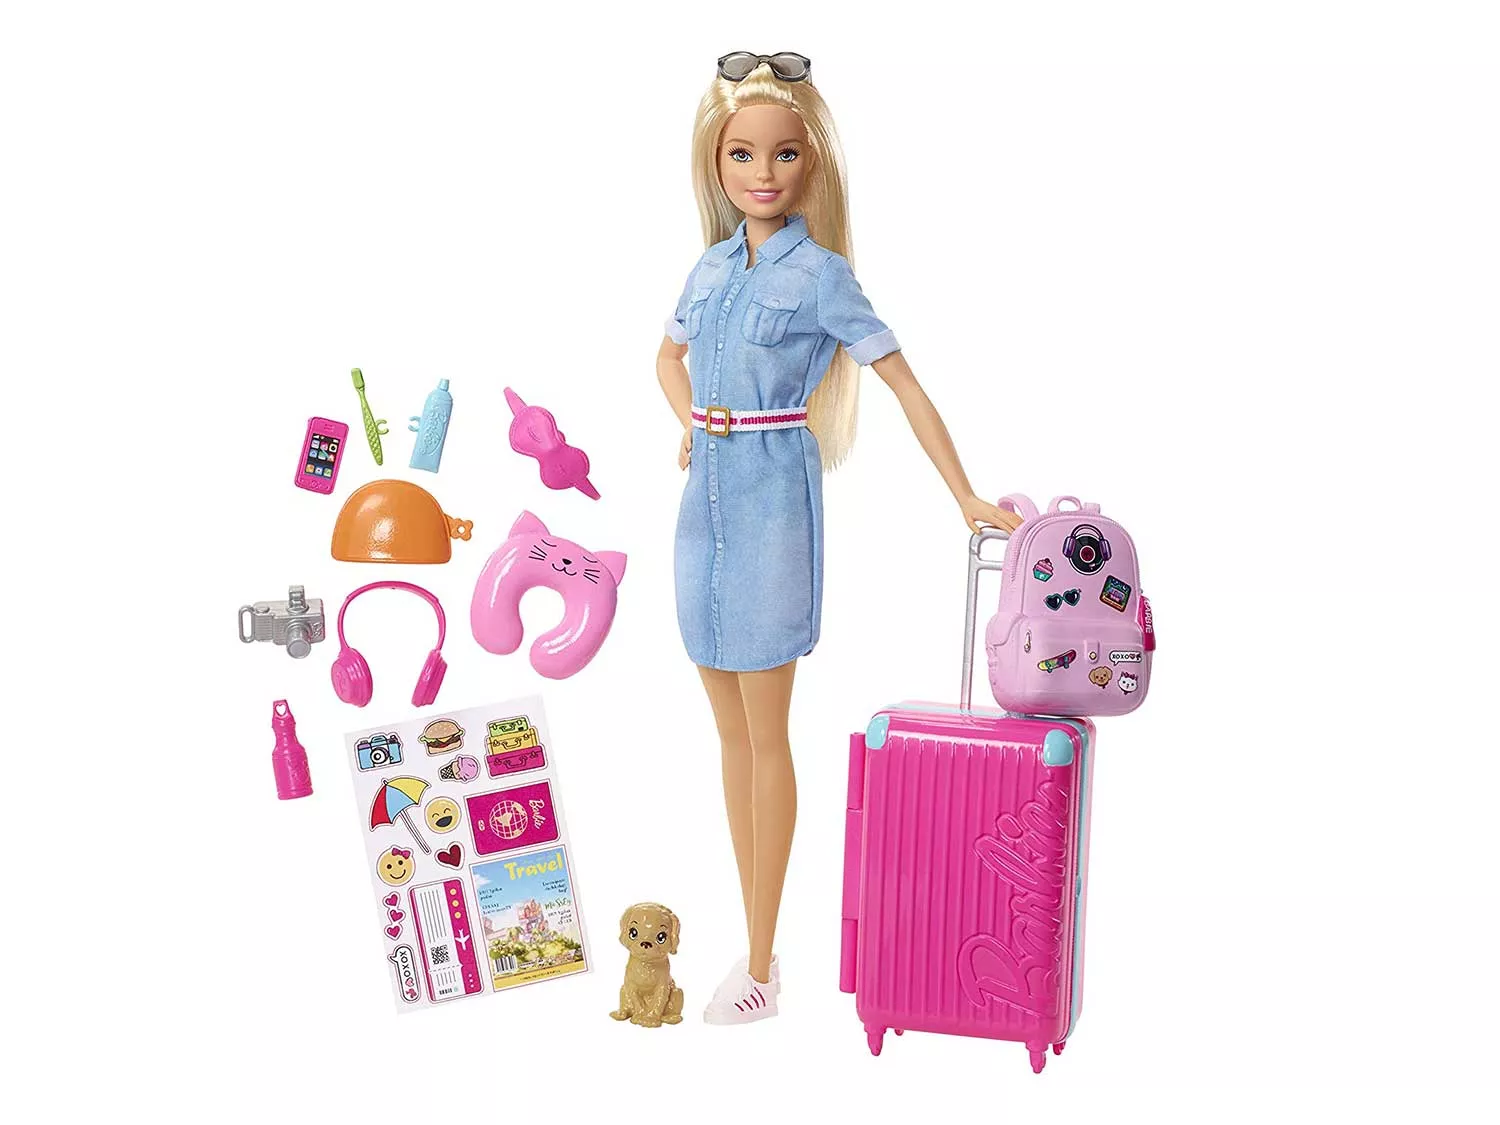 Barbie Travel-Themed Doll